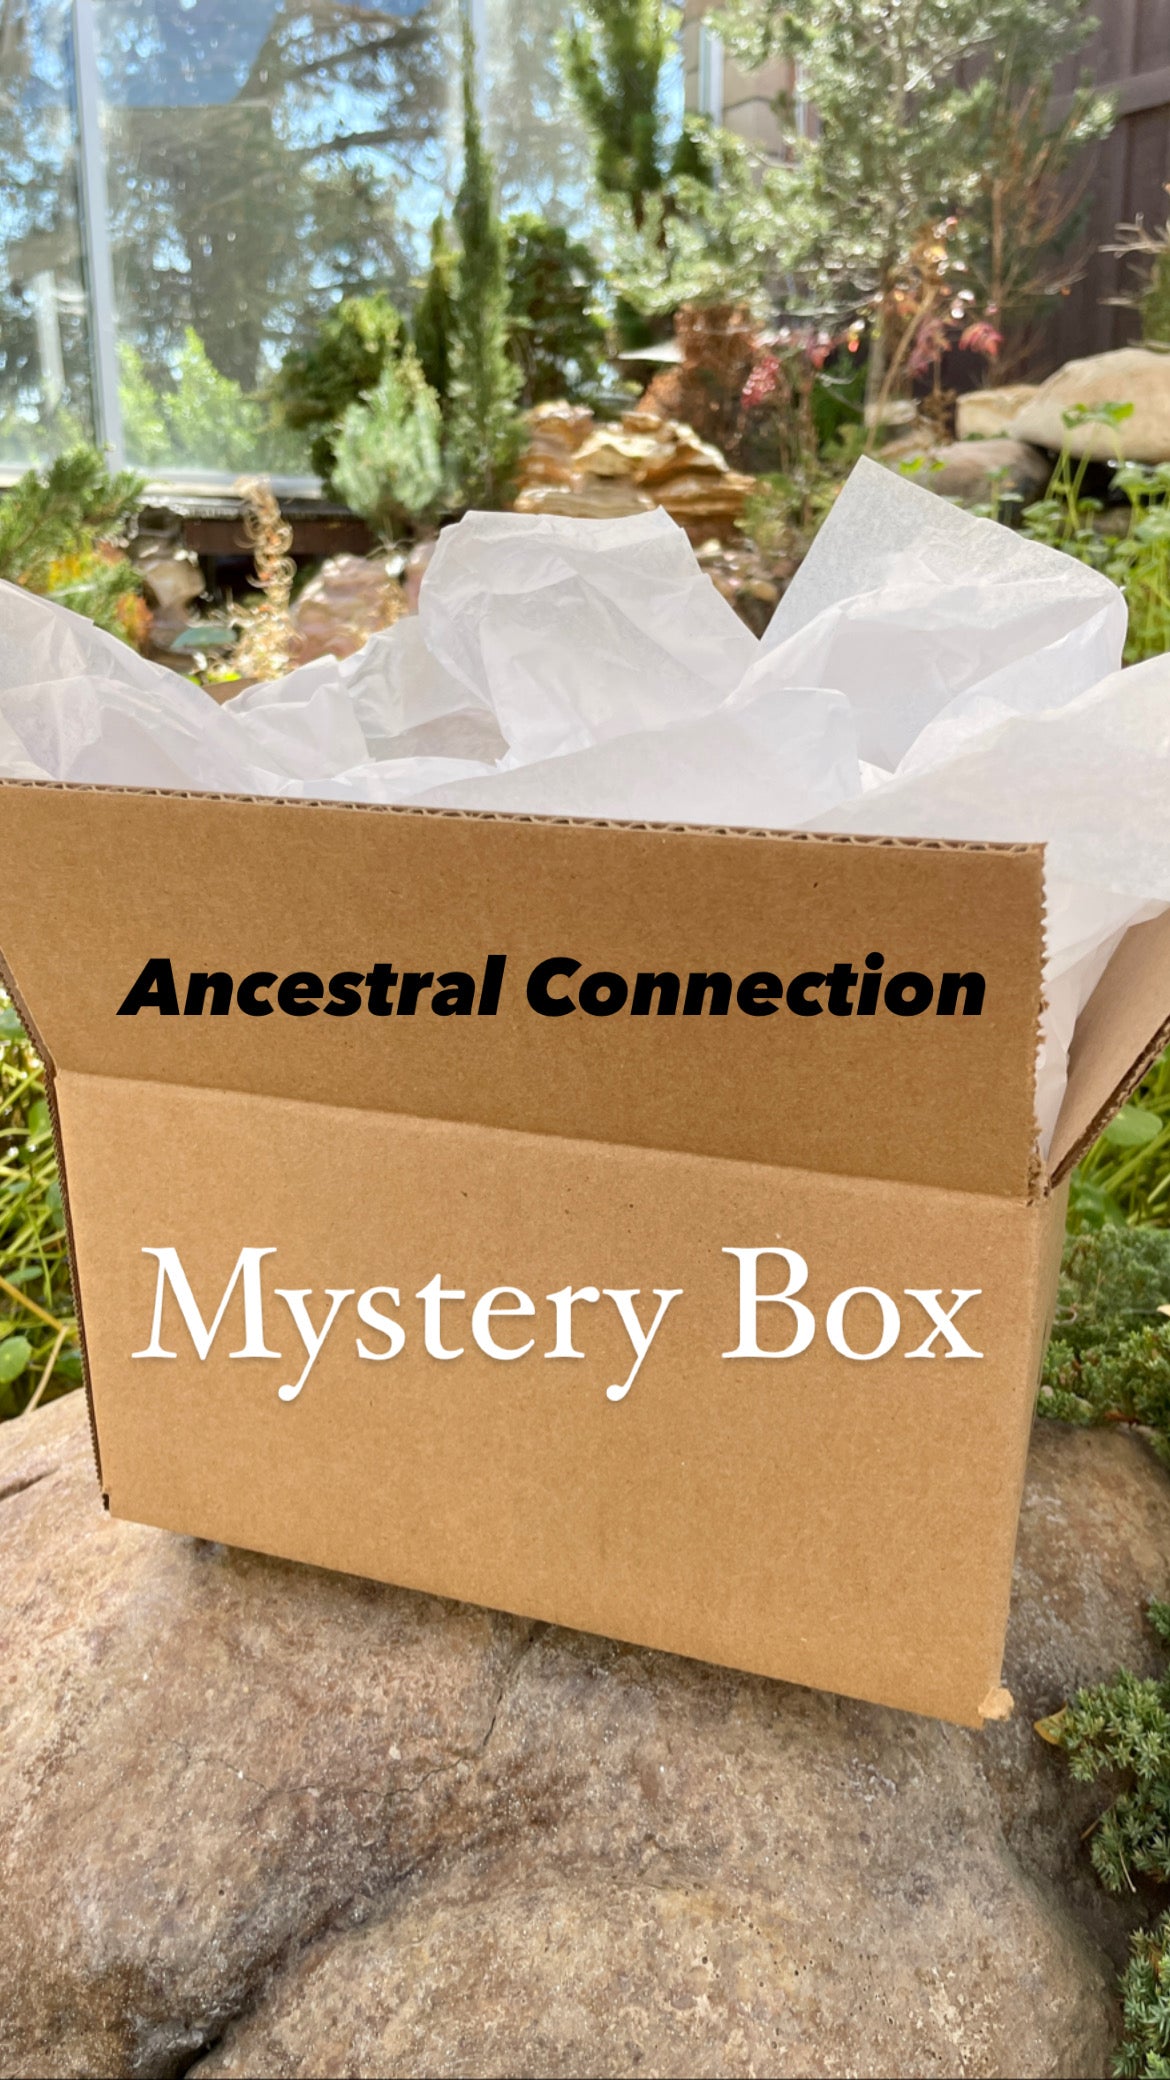 Ancestral Connection Mystery Box $80